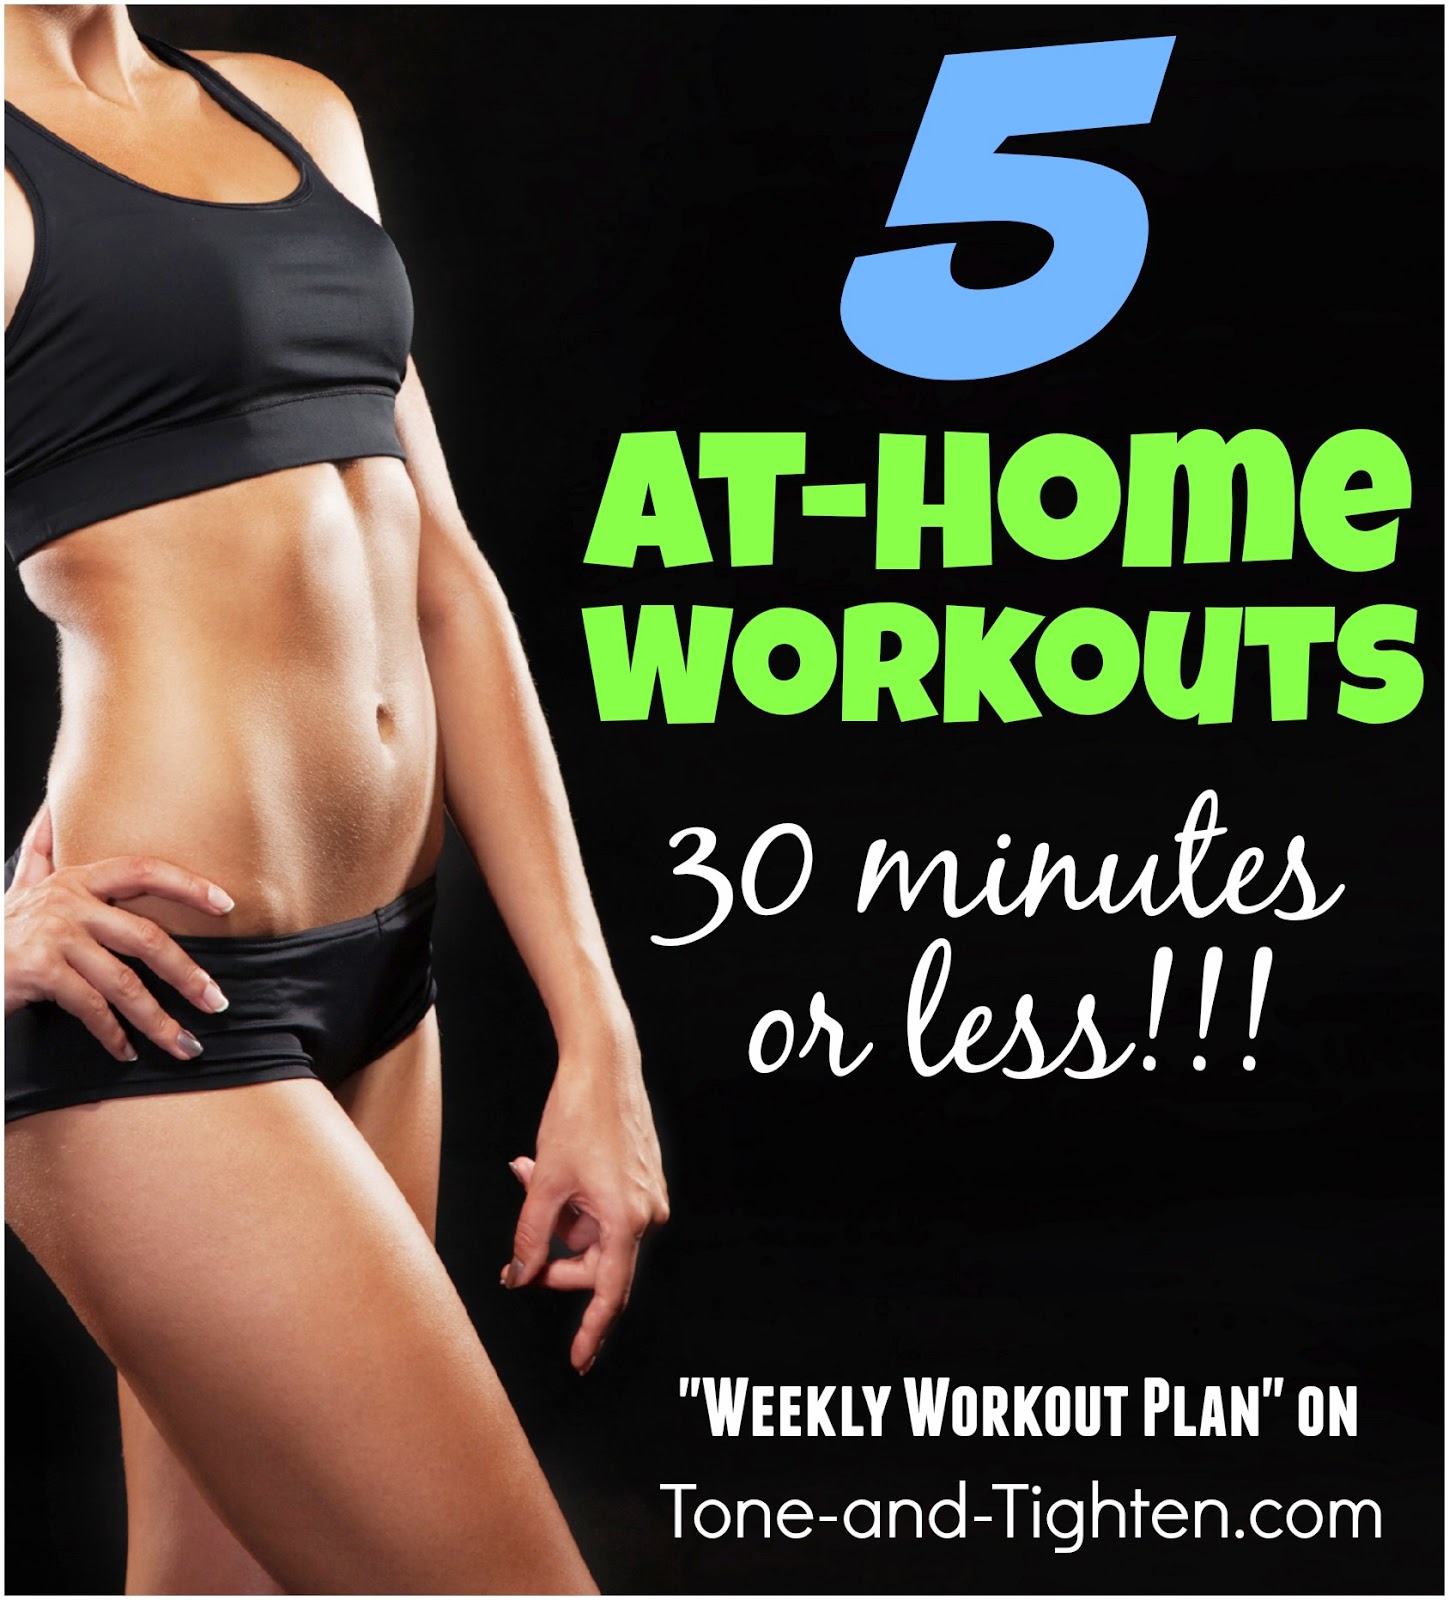 Weekly Workout Plan – The Best Quick Workouts – 30 minutes or less!